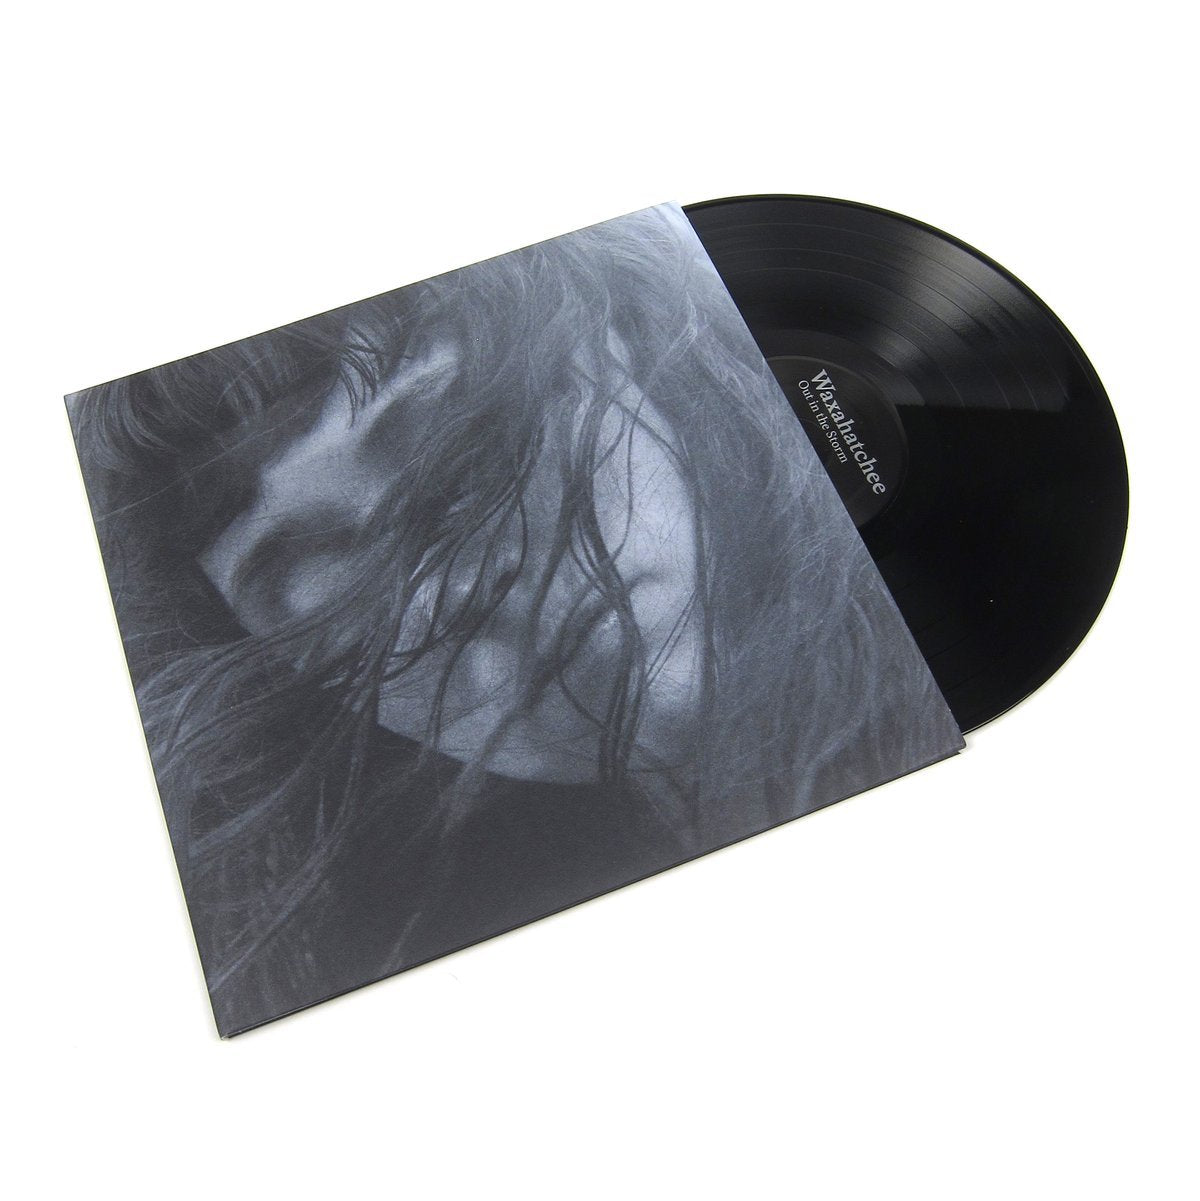 Waxahatchee | Out In The Storm (Digital Download Card) LP | Vinyl